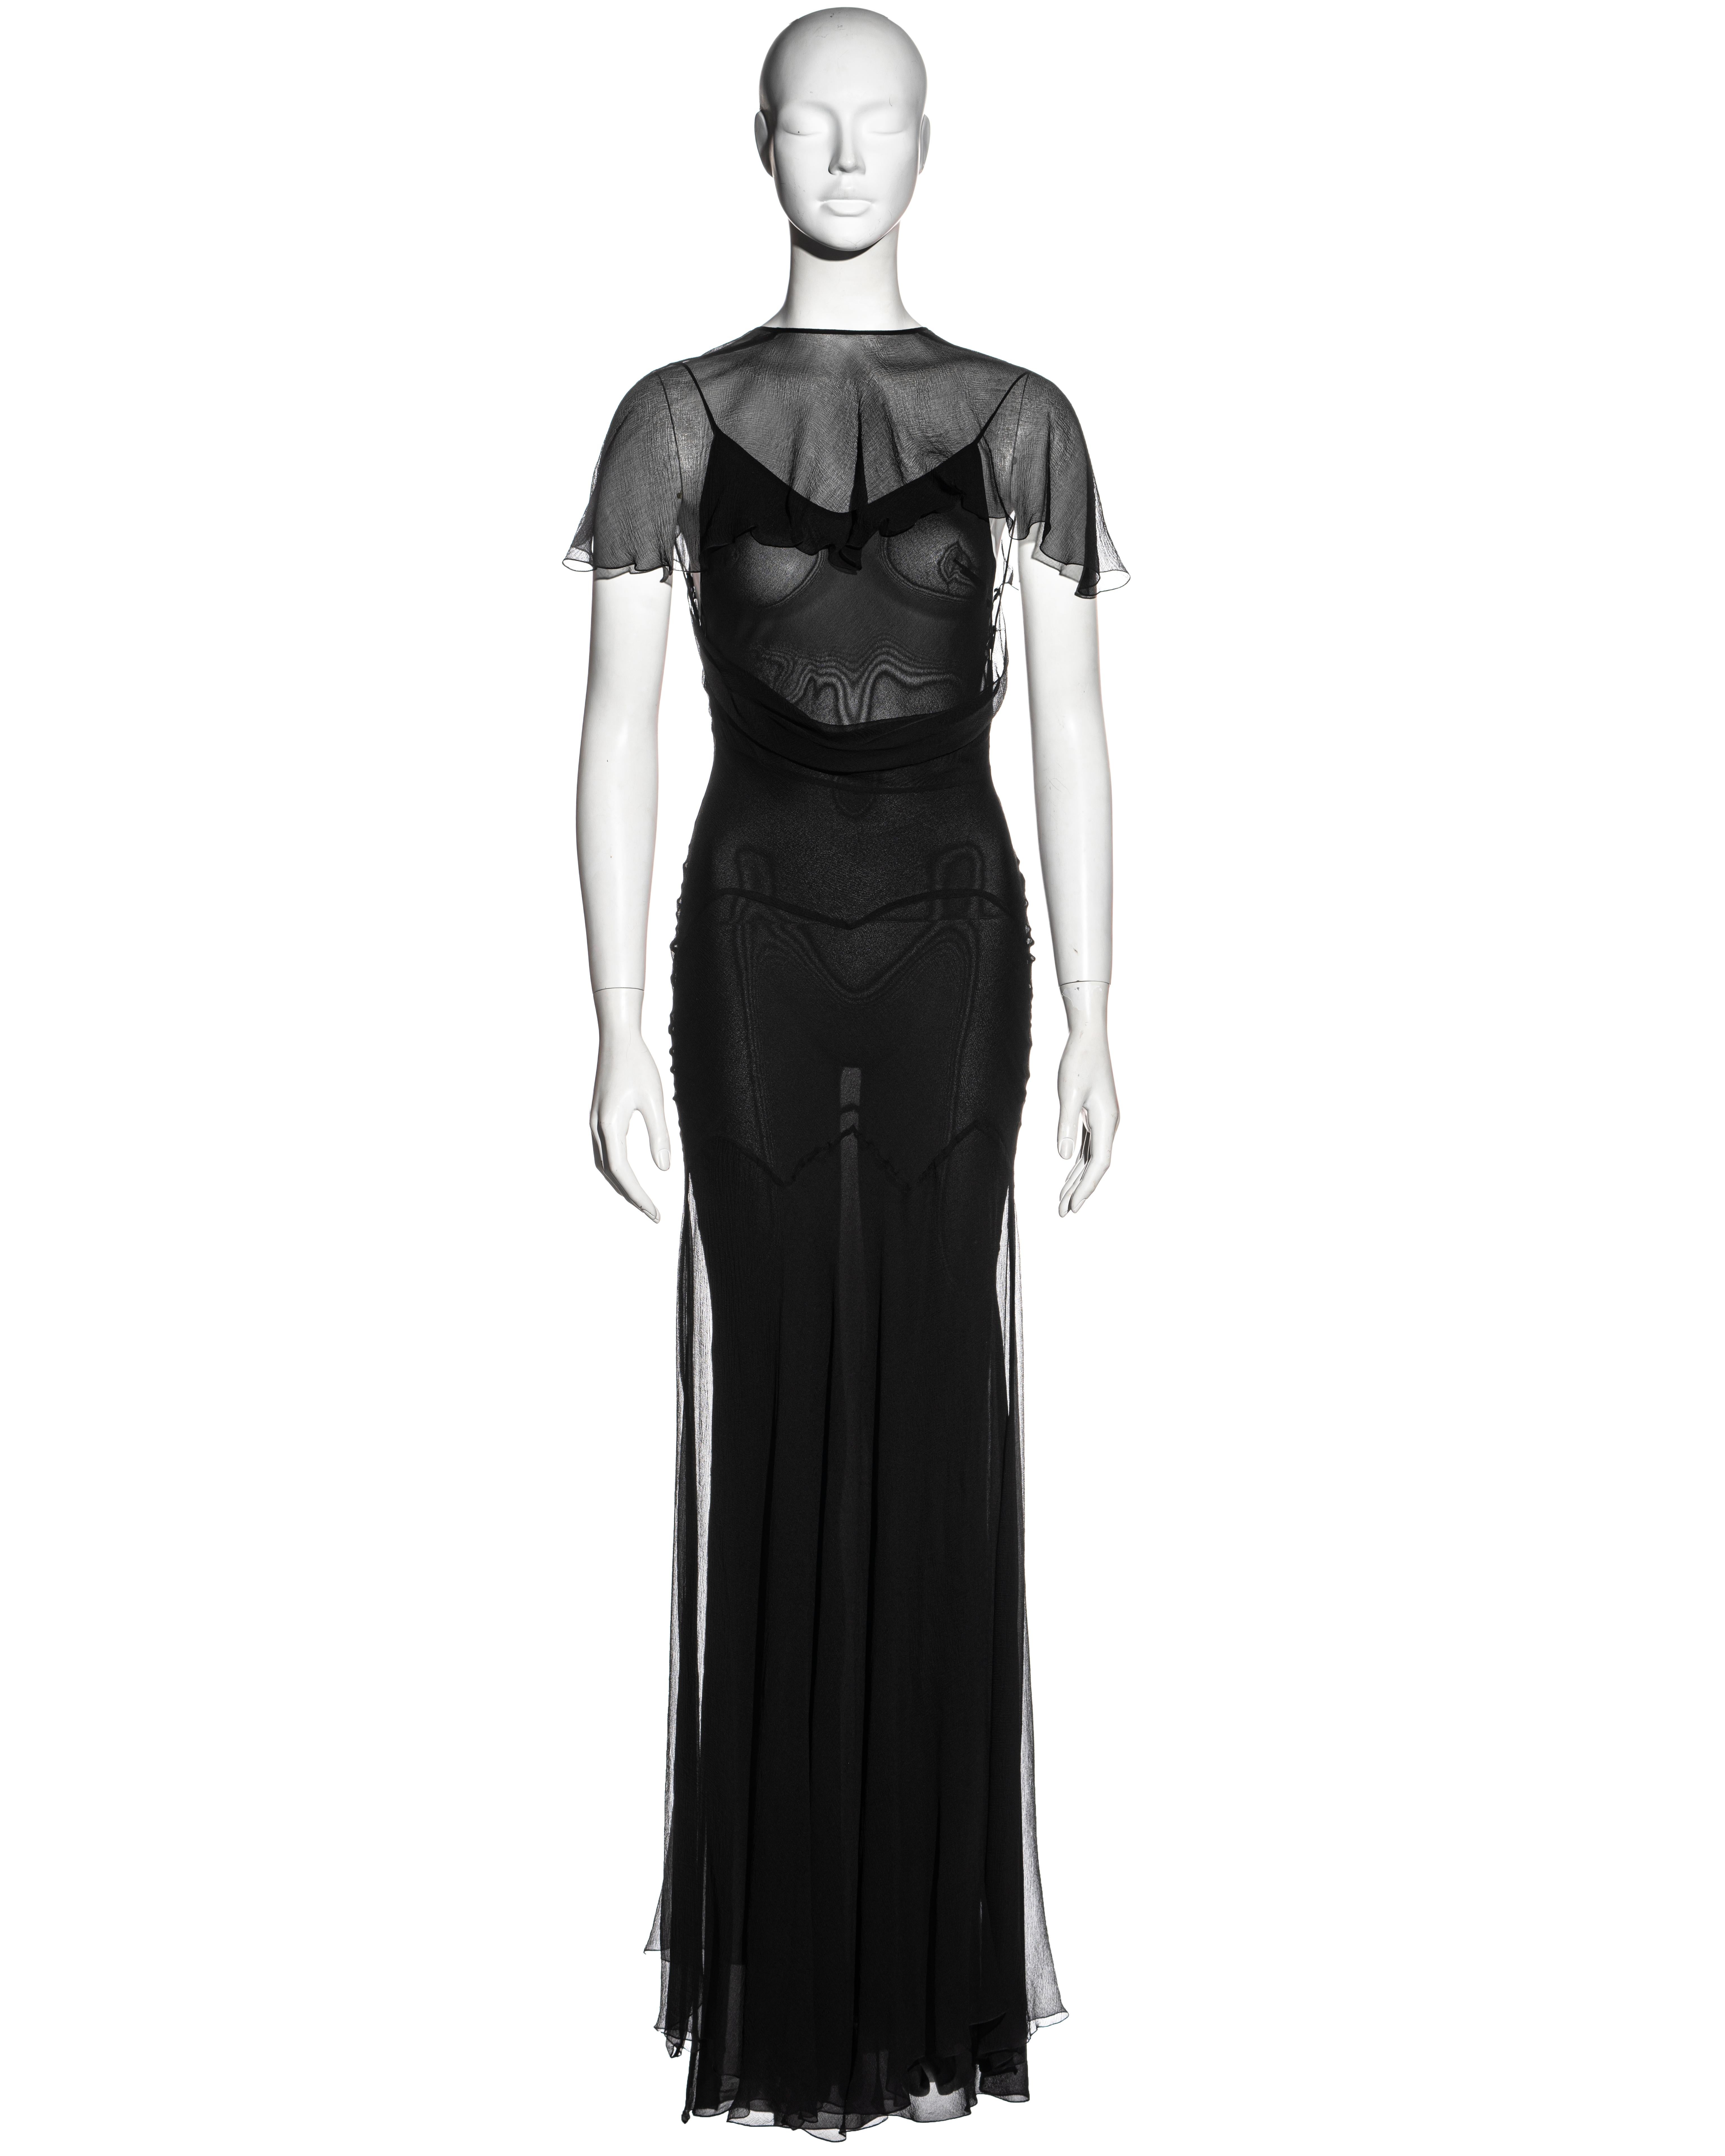 ▪ John Galliano black silk chiffon bias cut evening dress 
▪ Ruffled detail on bodice 
▪ Caplet collar 
▪ Overdress can be styled both ways 
▪ Slip dress with low open back, spaghetti straps and legs slits on both sides
▪ Size approx. Medium
▪ c.